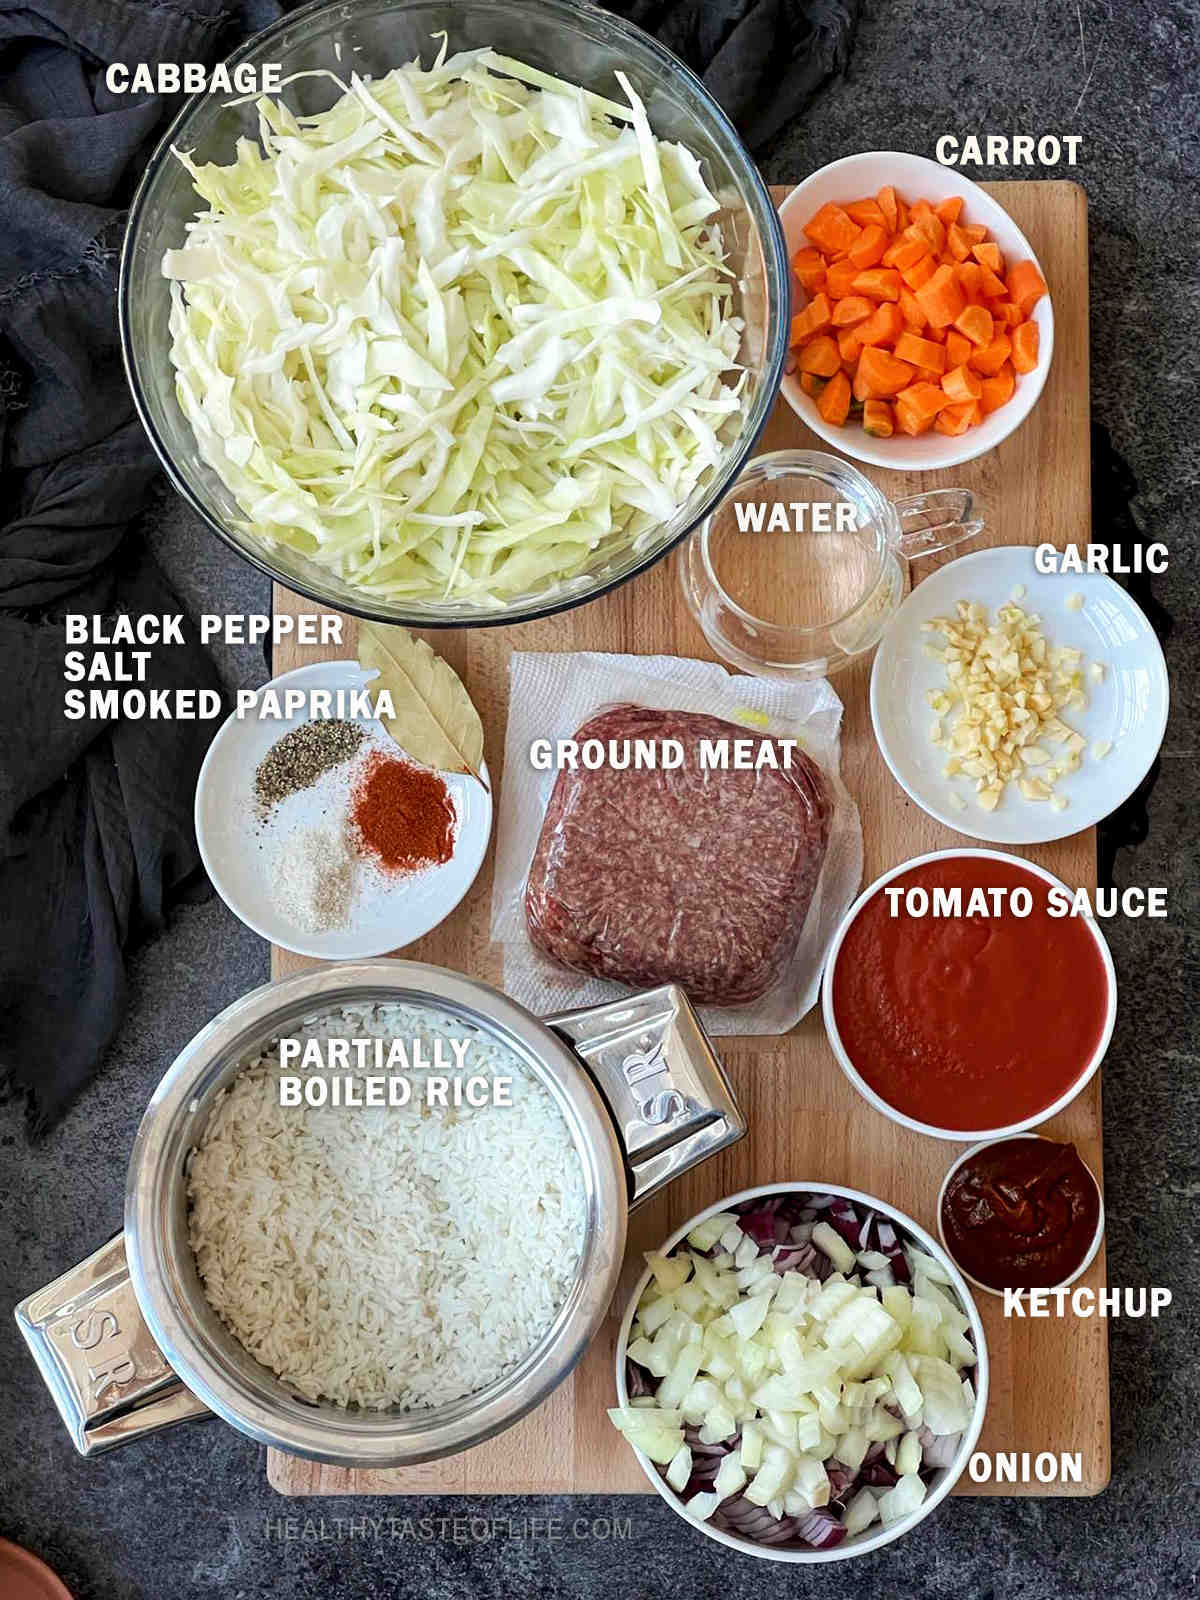 Image showing the ingredients for lazy cabbage roll casserole recipe displayed on a board with exact measurements.